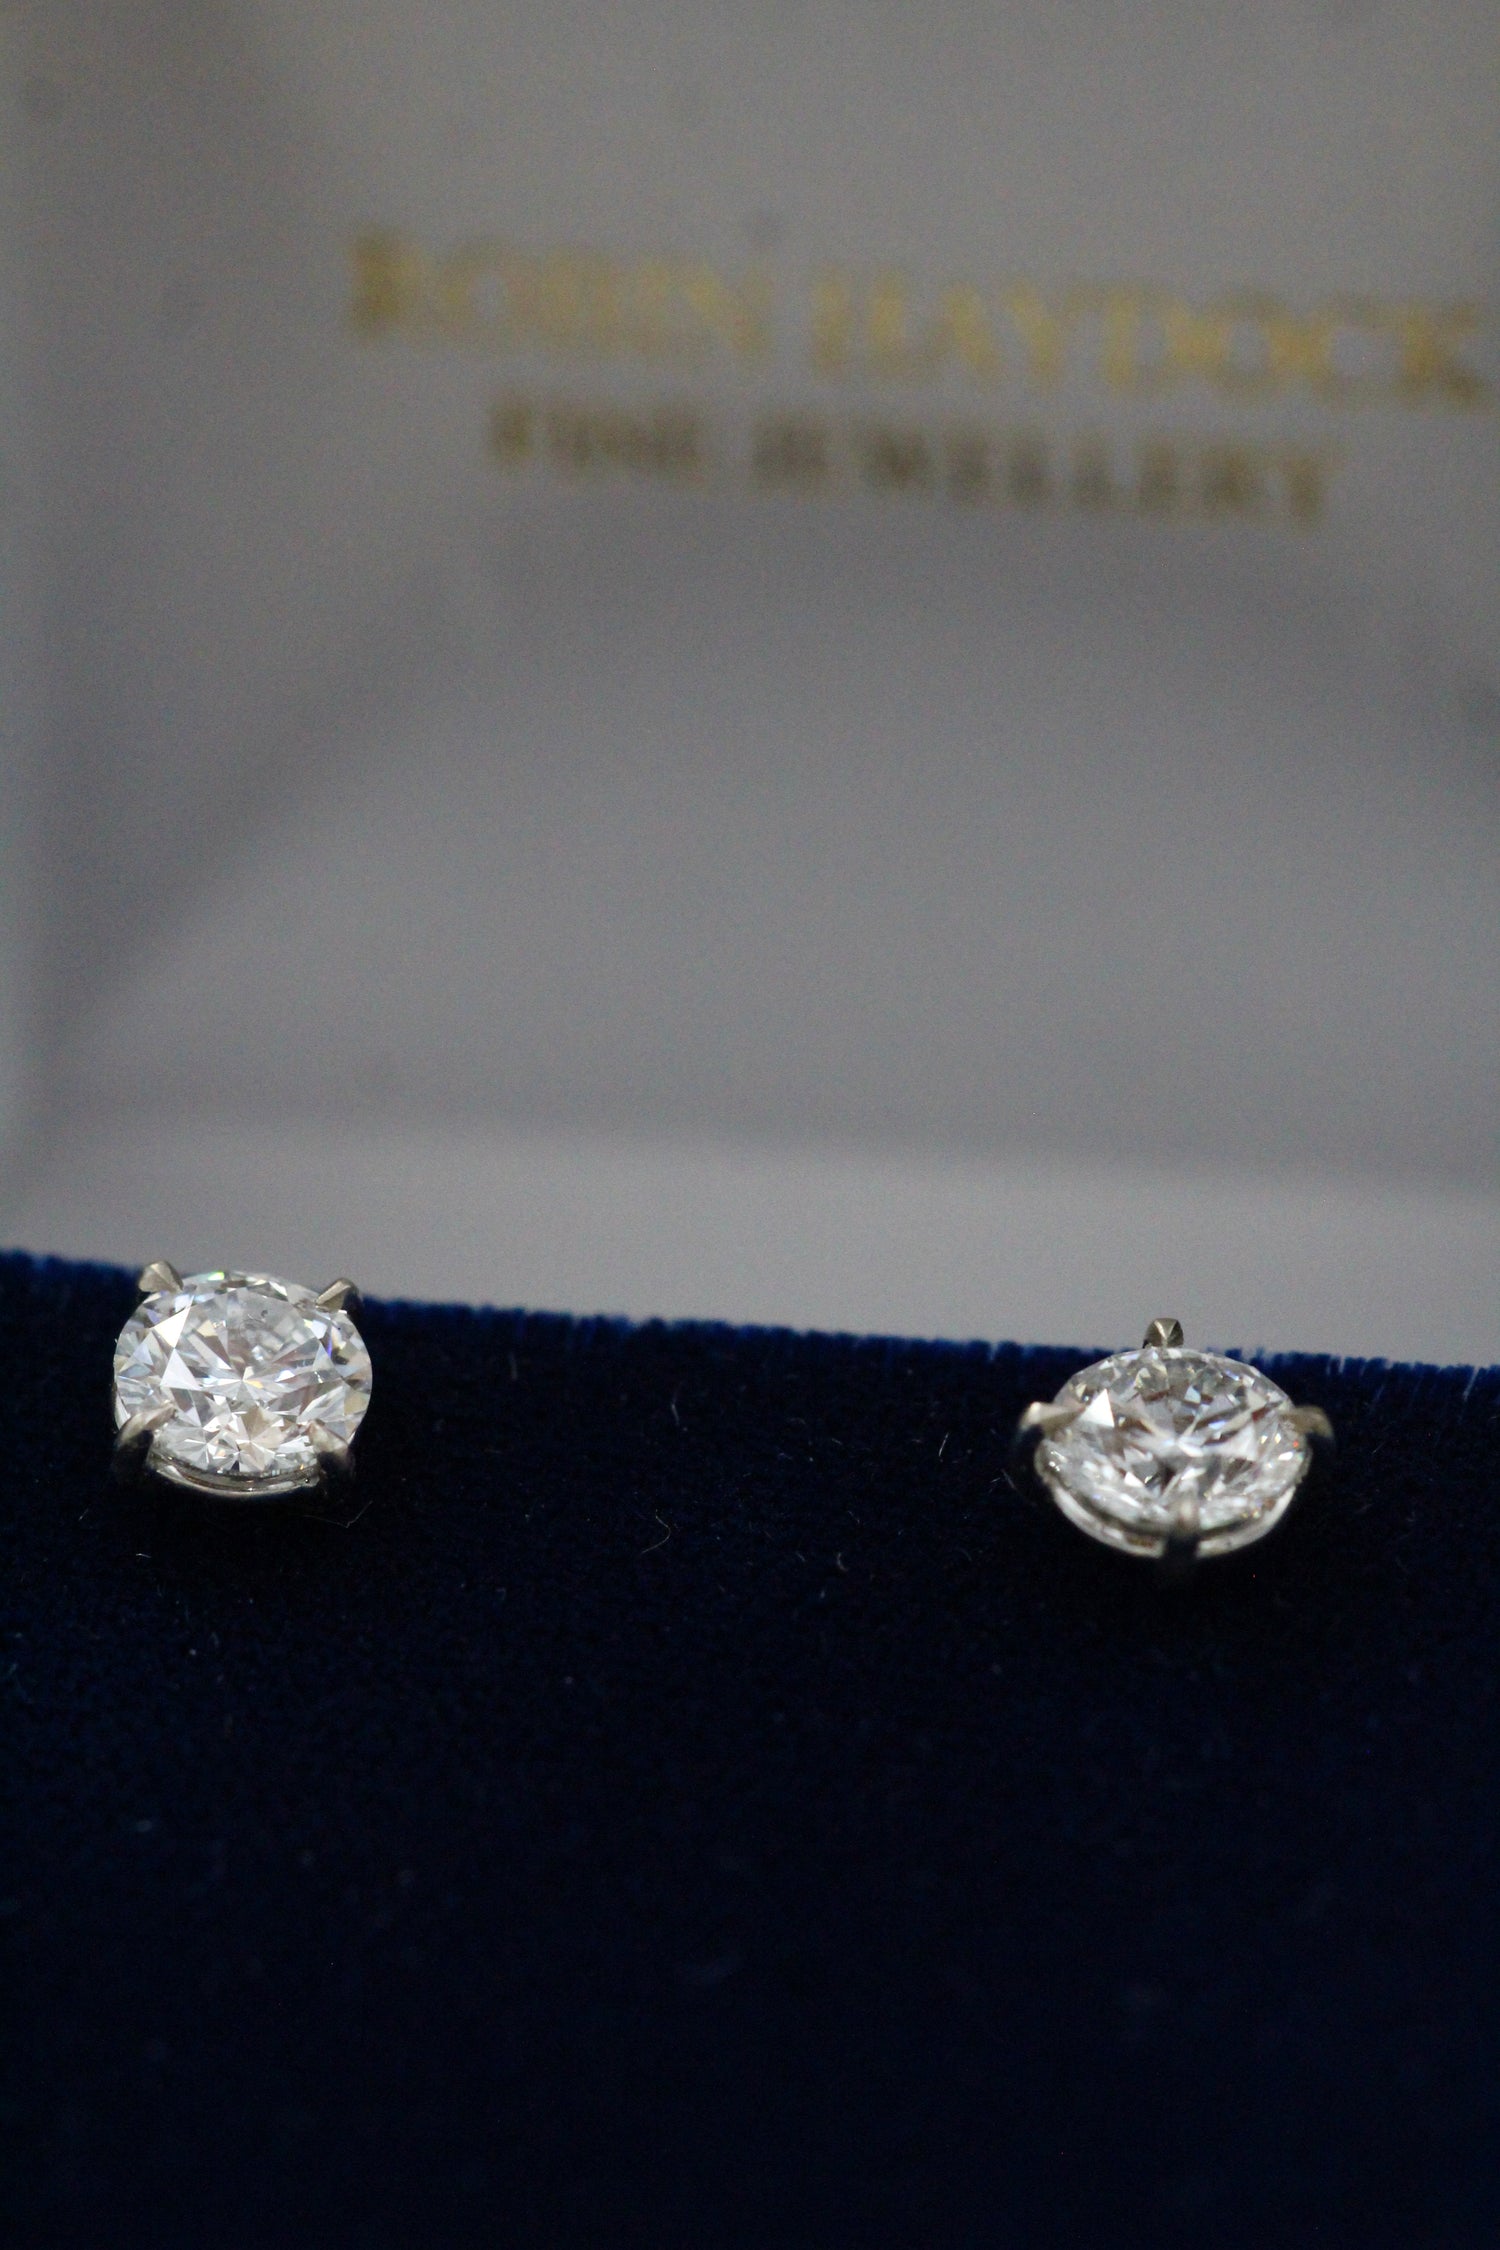 A fine pair of 18 Carat White Gold (Stamped) Diamond Earrings, two Round Brilliant Cut Diamonds of 3.03 Carats, G Colour & SI2 Clarity Pre-owned - Robin Haydock Antiques